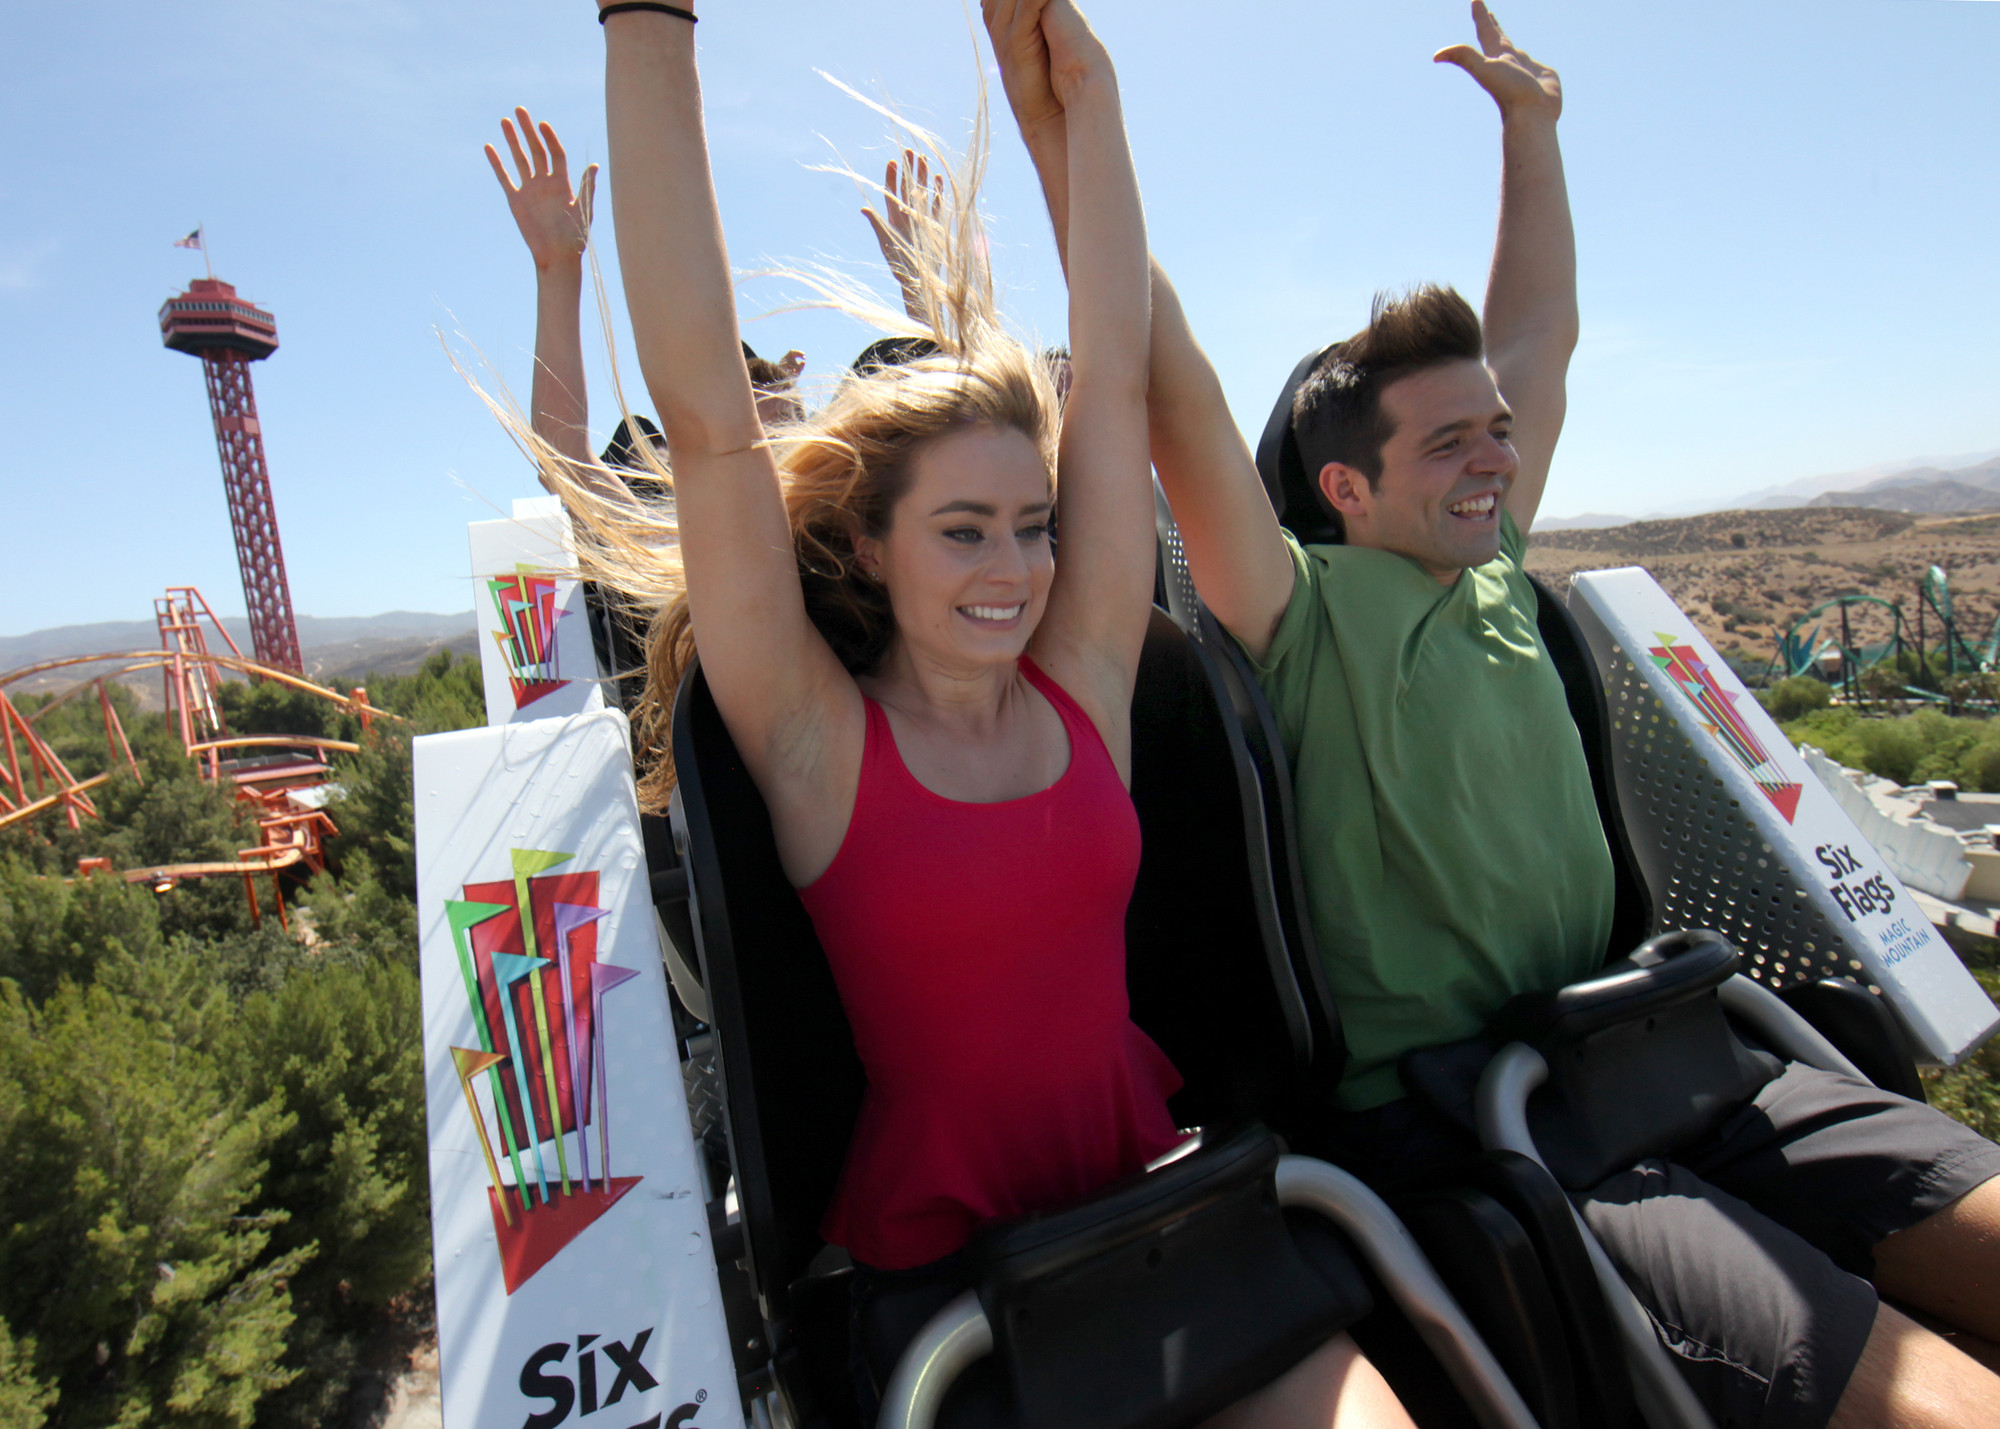 People on a roller coaster with their hands in the air